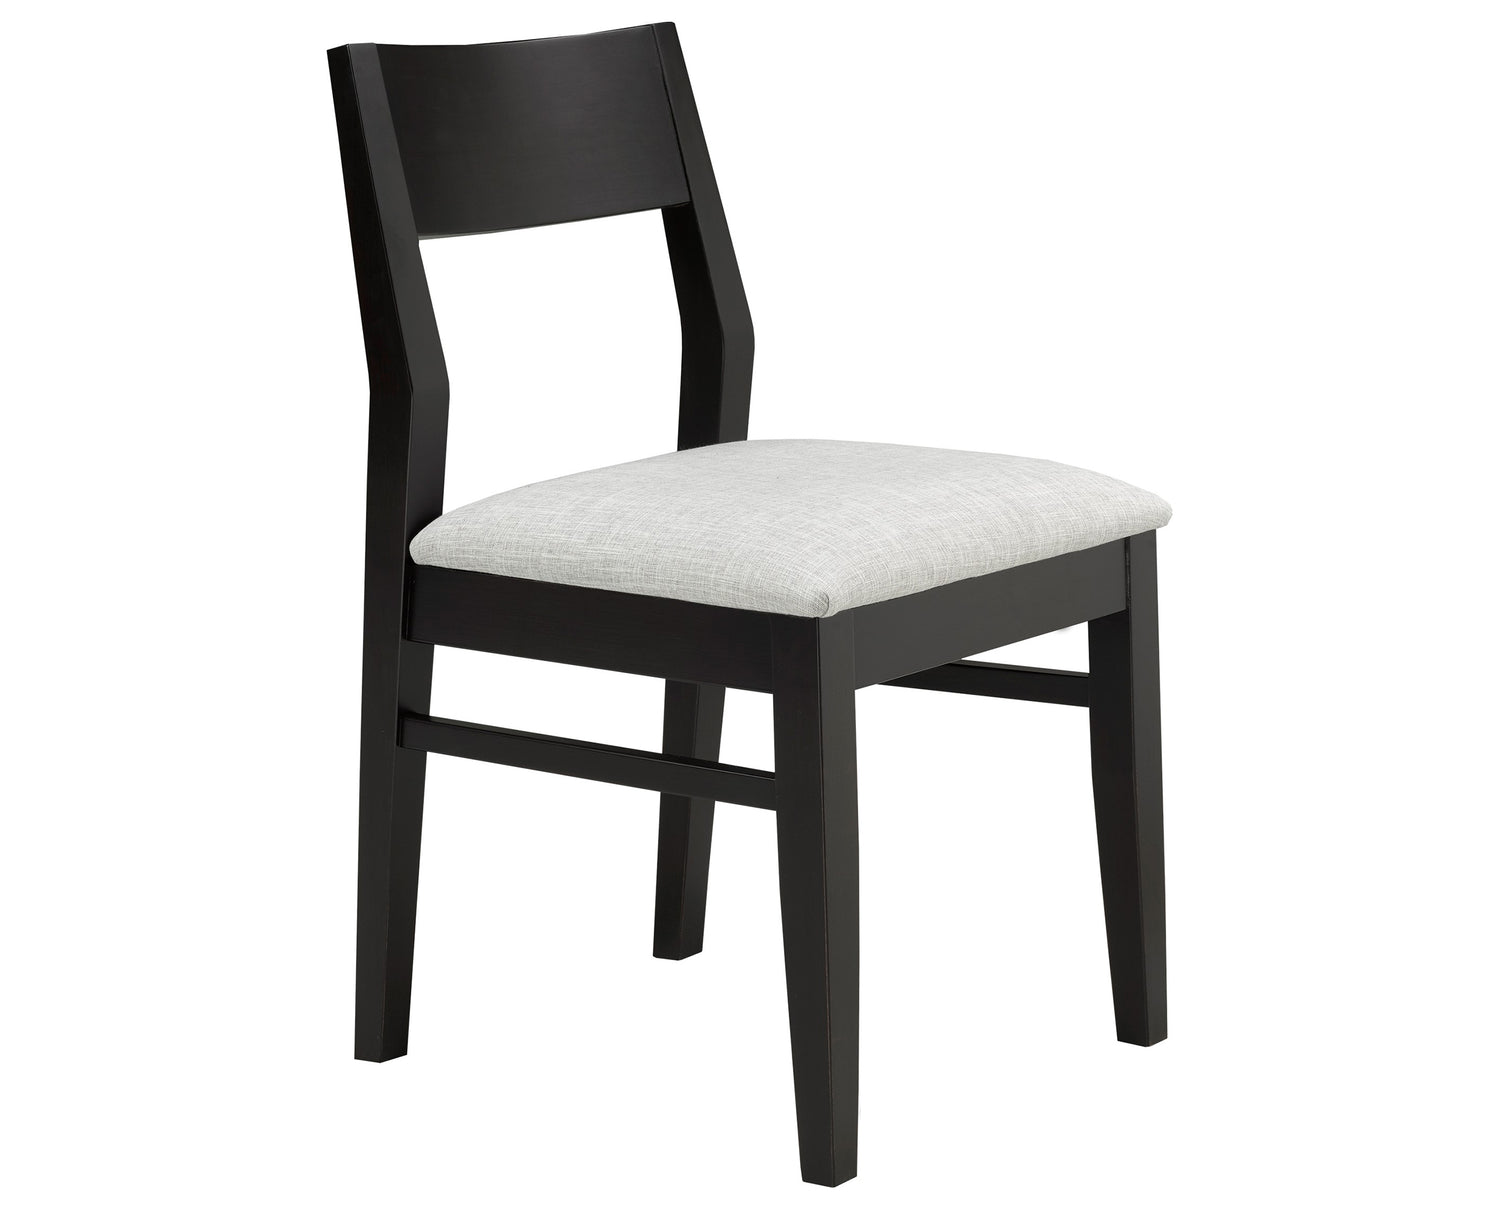 Chair as Shown | Cardinal Woodcraft Stanford Dining Chair | Valley Ridge Furniture